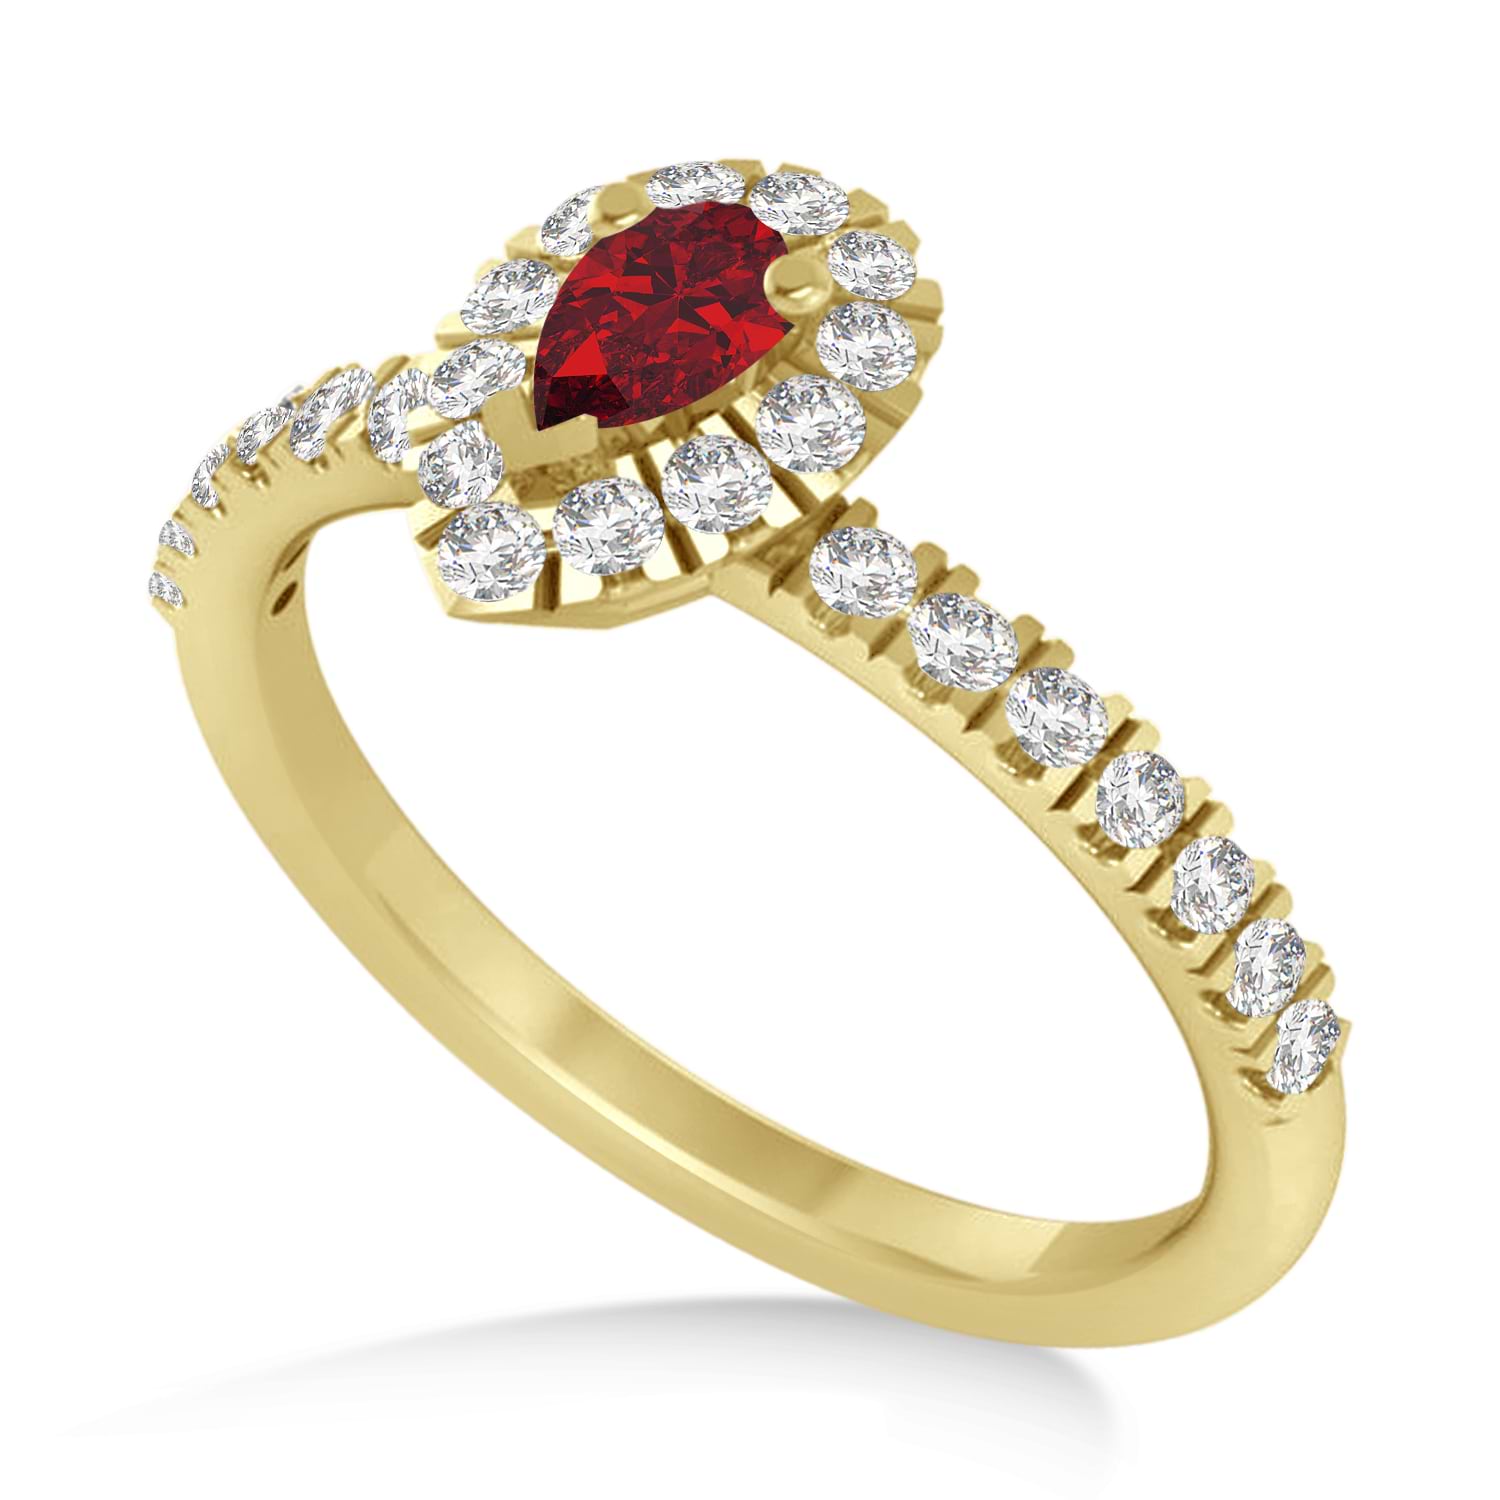 Pear Ruby & Diamond Halo Engagement Ring 14k Yellow Gold (0.63ct)